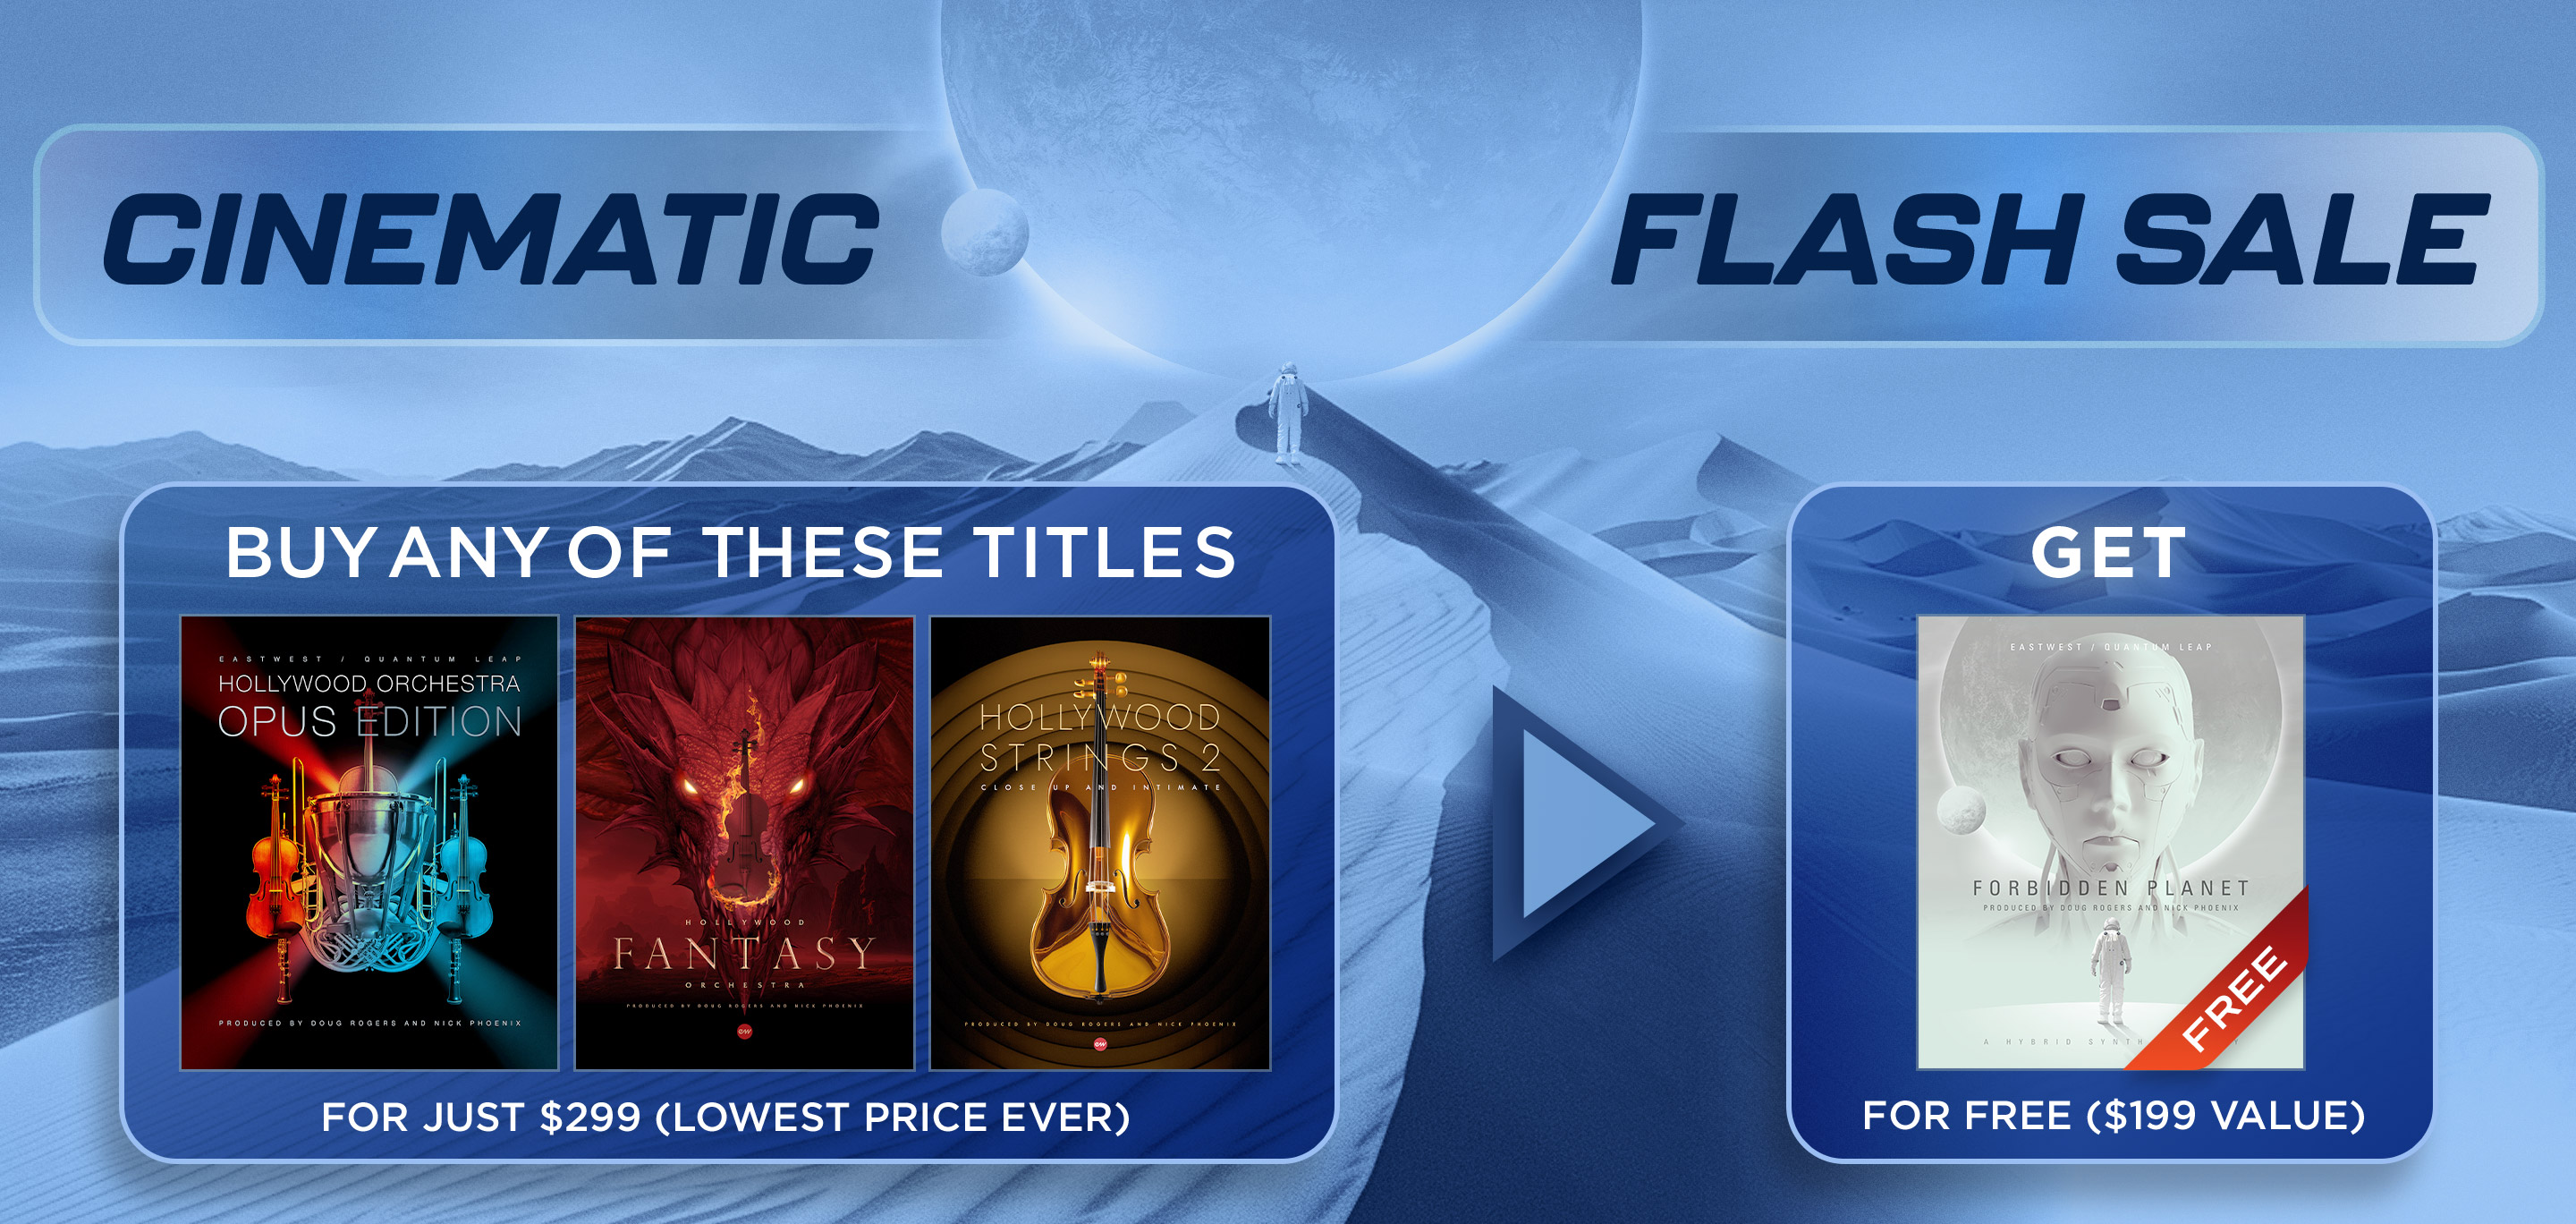 EastWest Cinematic Flash Sale - Get Forbidden Planet for FREE with valid purchase